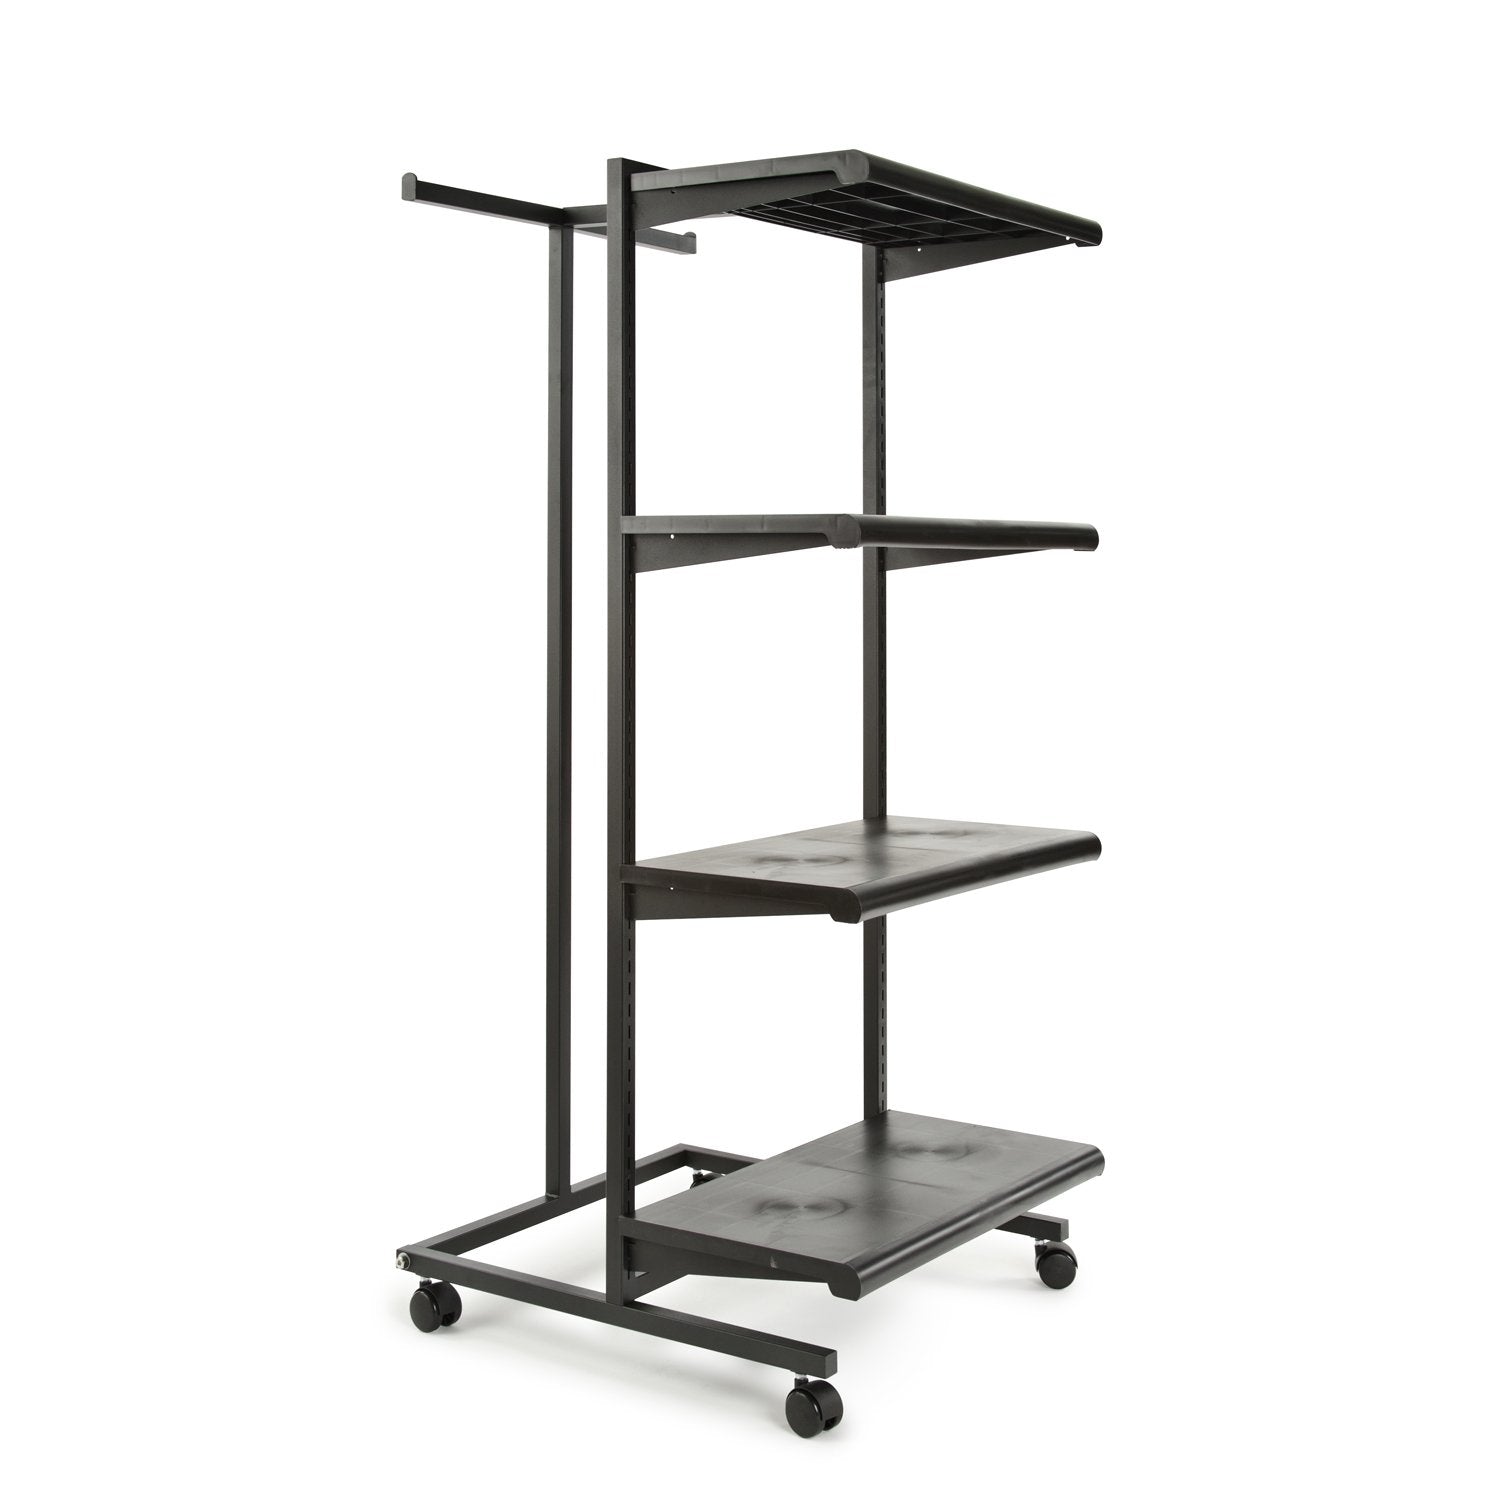 Frame w/ 4-24" Shelves and 1 T-Stand; 1" Square Tubing - Las Vegas Mannequins